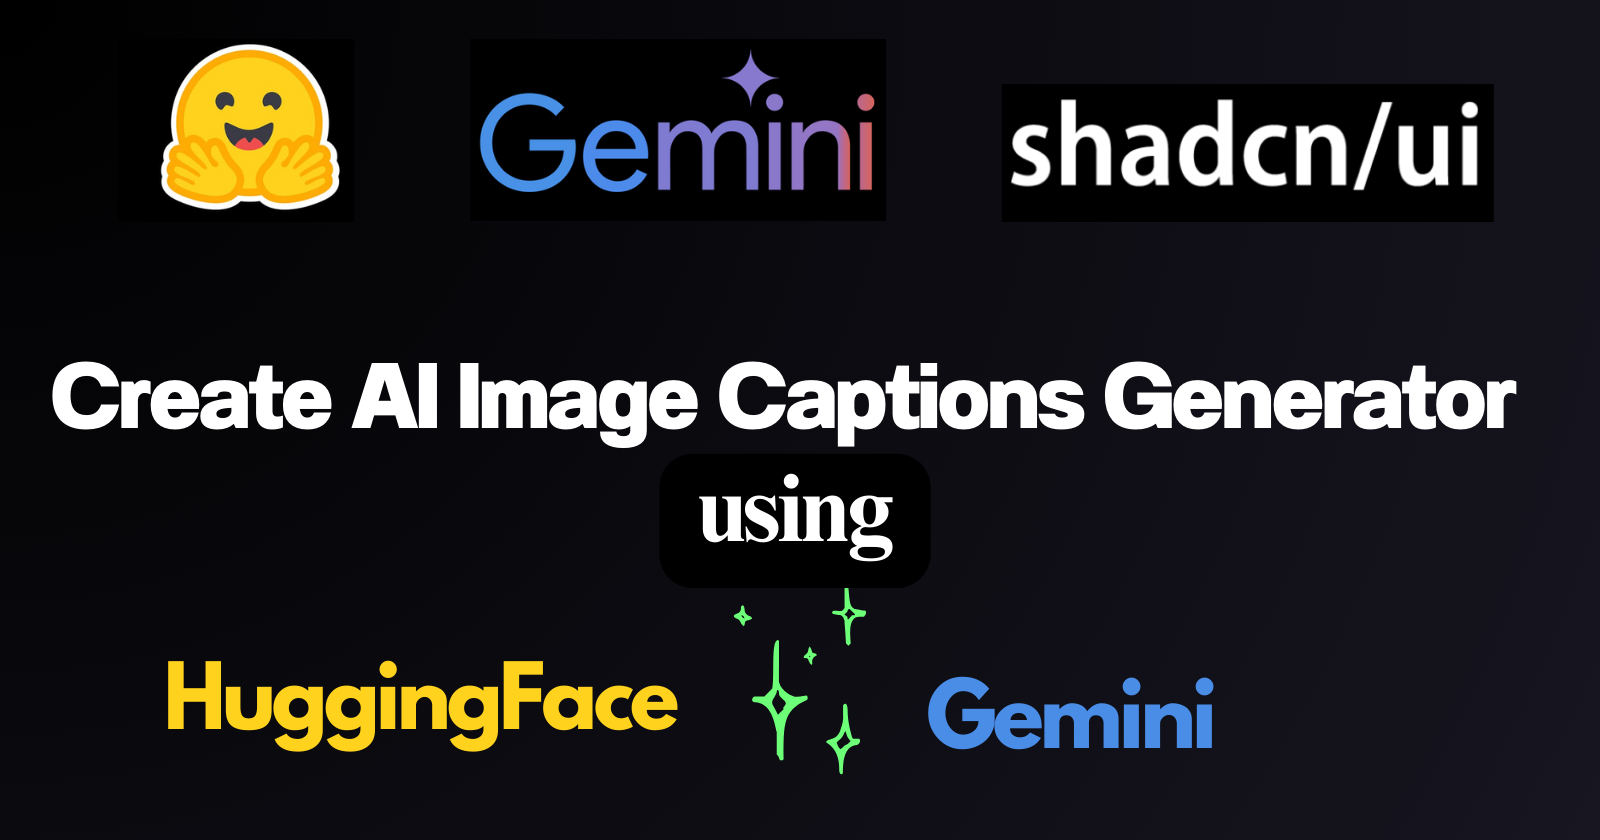 How to Build an Image Caption Generator App Using AI with HuggingFace and Gemini